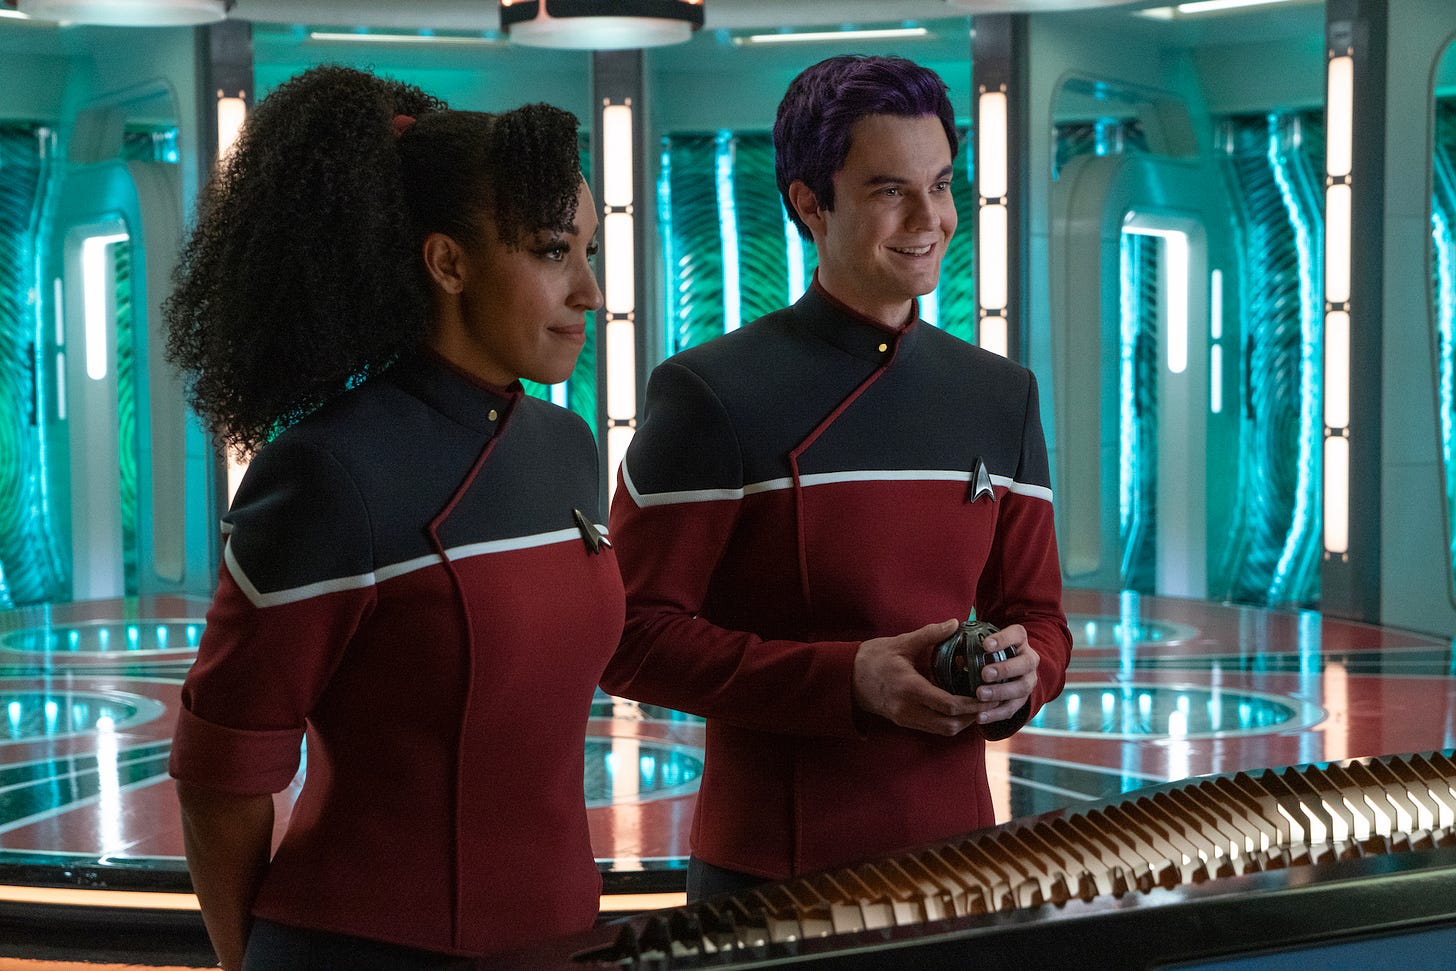 Tawny Newsome as Mariner and Jack Quaid as Boimler in the trailer of Star Trek: Strange New Worlds, streaming on Paramount+, 2023. Photo Cr: Michael Gibson/Paramount+